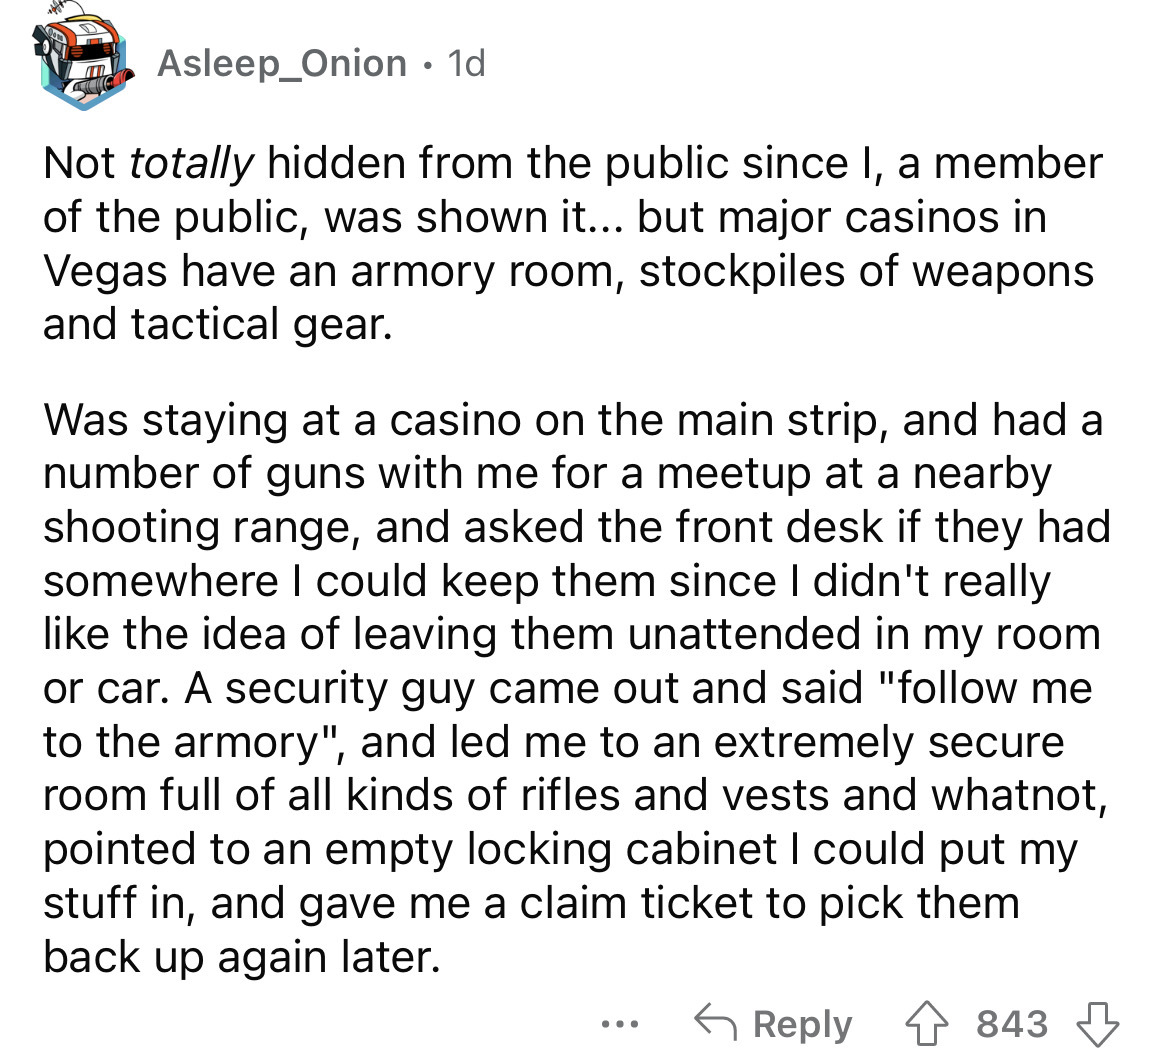 angle - 1d Not totally hidden from the public since I, a member of the public, was shown it... but major casinos in Vegas have an armory room, stockpiles of weapons and tactical gear. Asleep_Onion Was staying at a casino on the main strip, and had a numbe